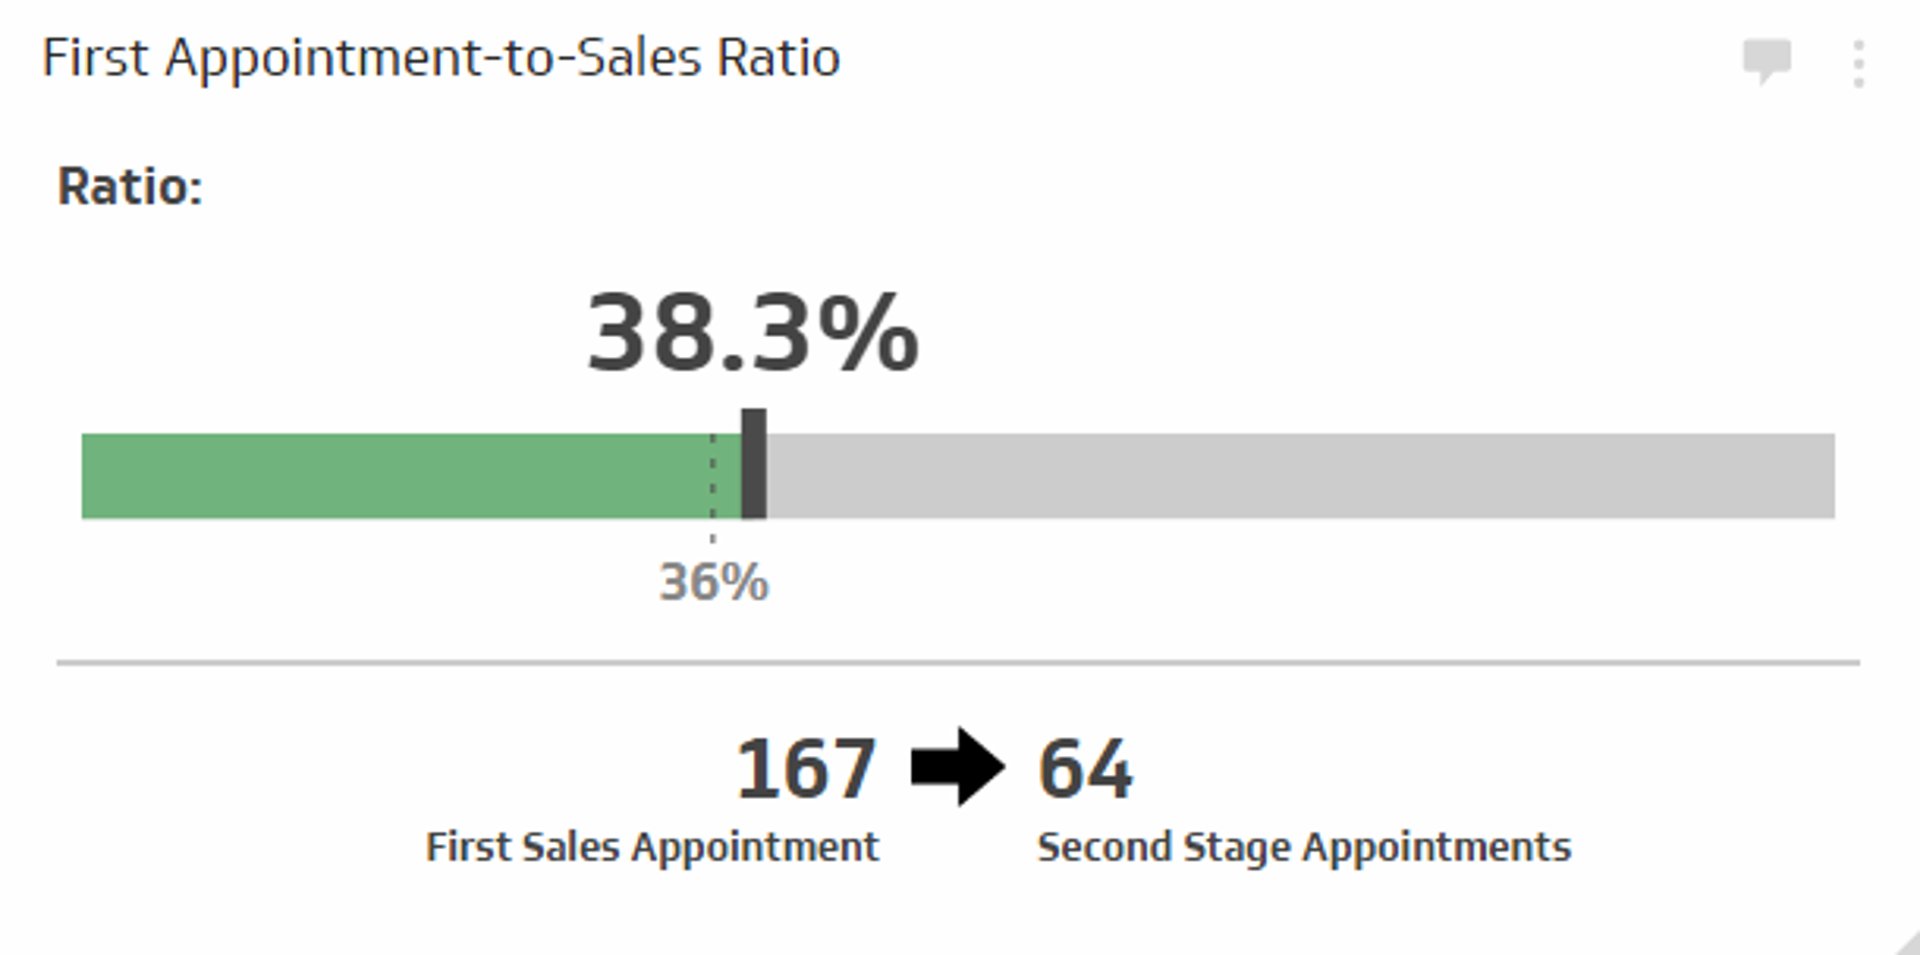 Related KPI Examples -  First Appointment-to-Sales Ratio Metric